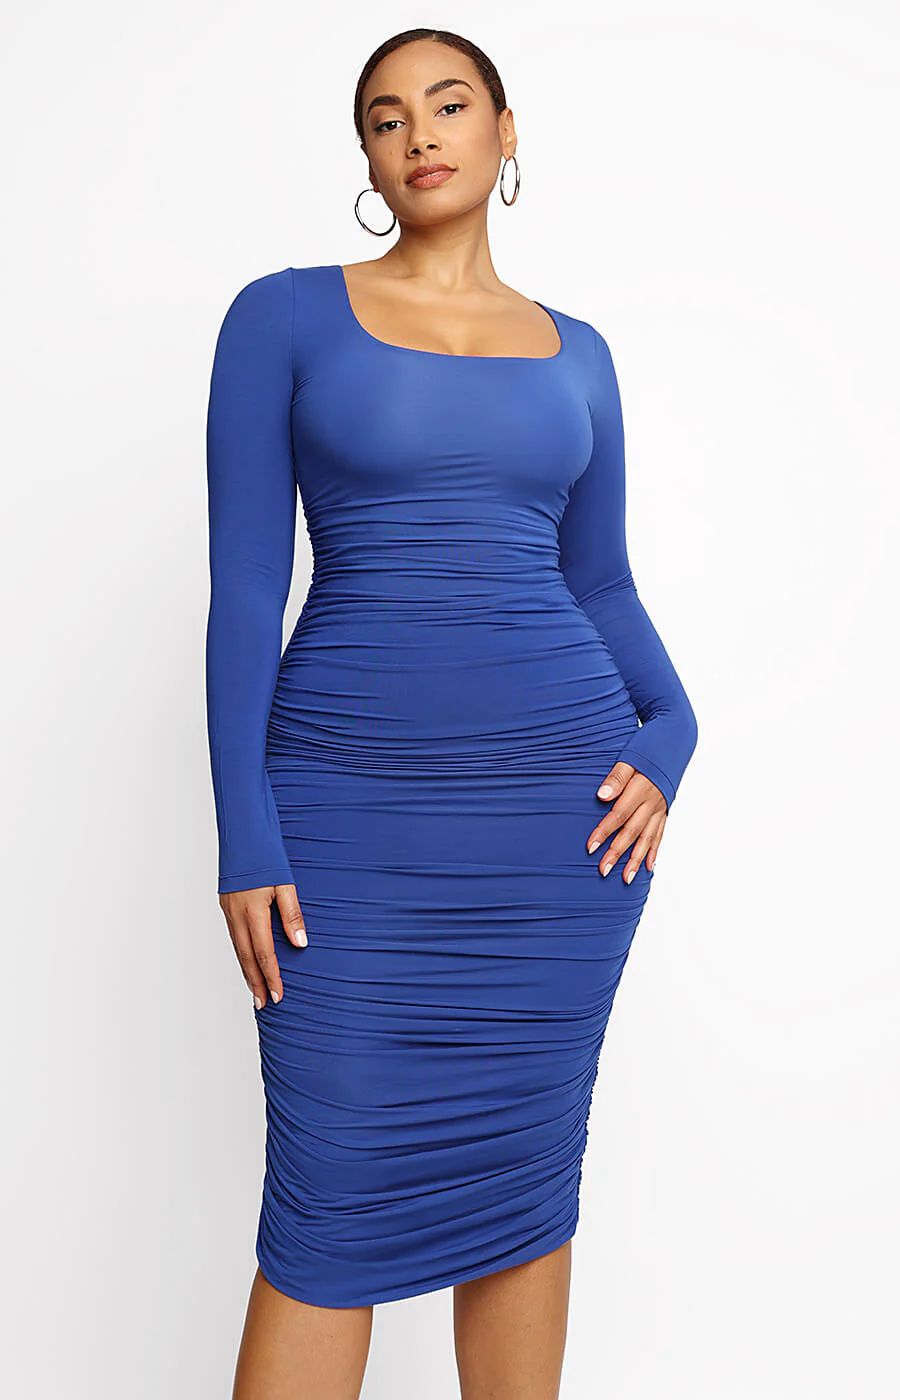 Built-In 360° Smooth Ruched Shaping Dress | Shapellx